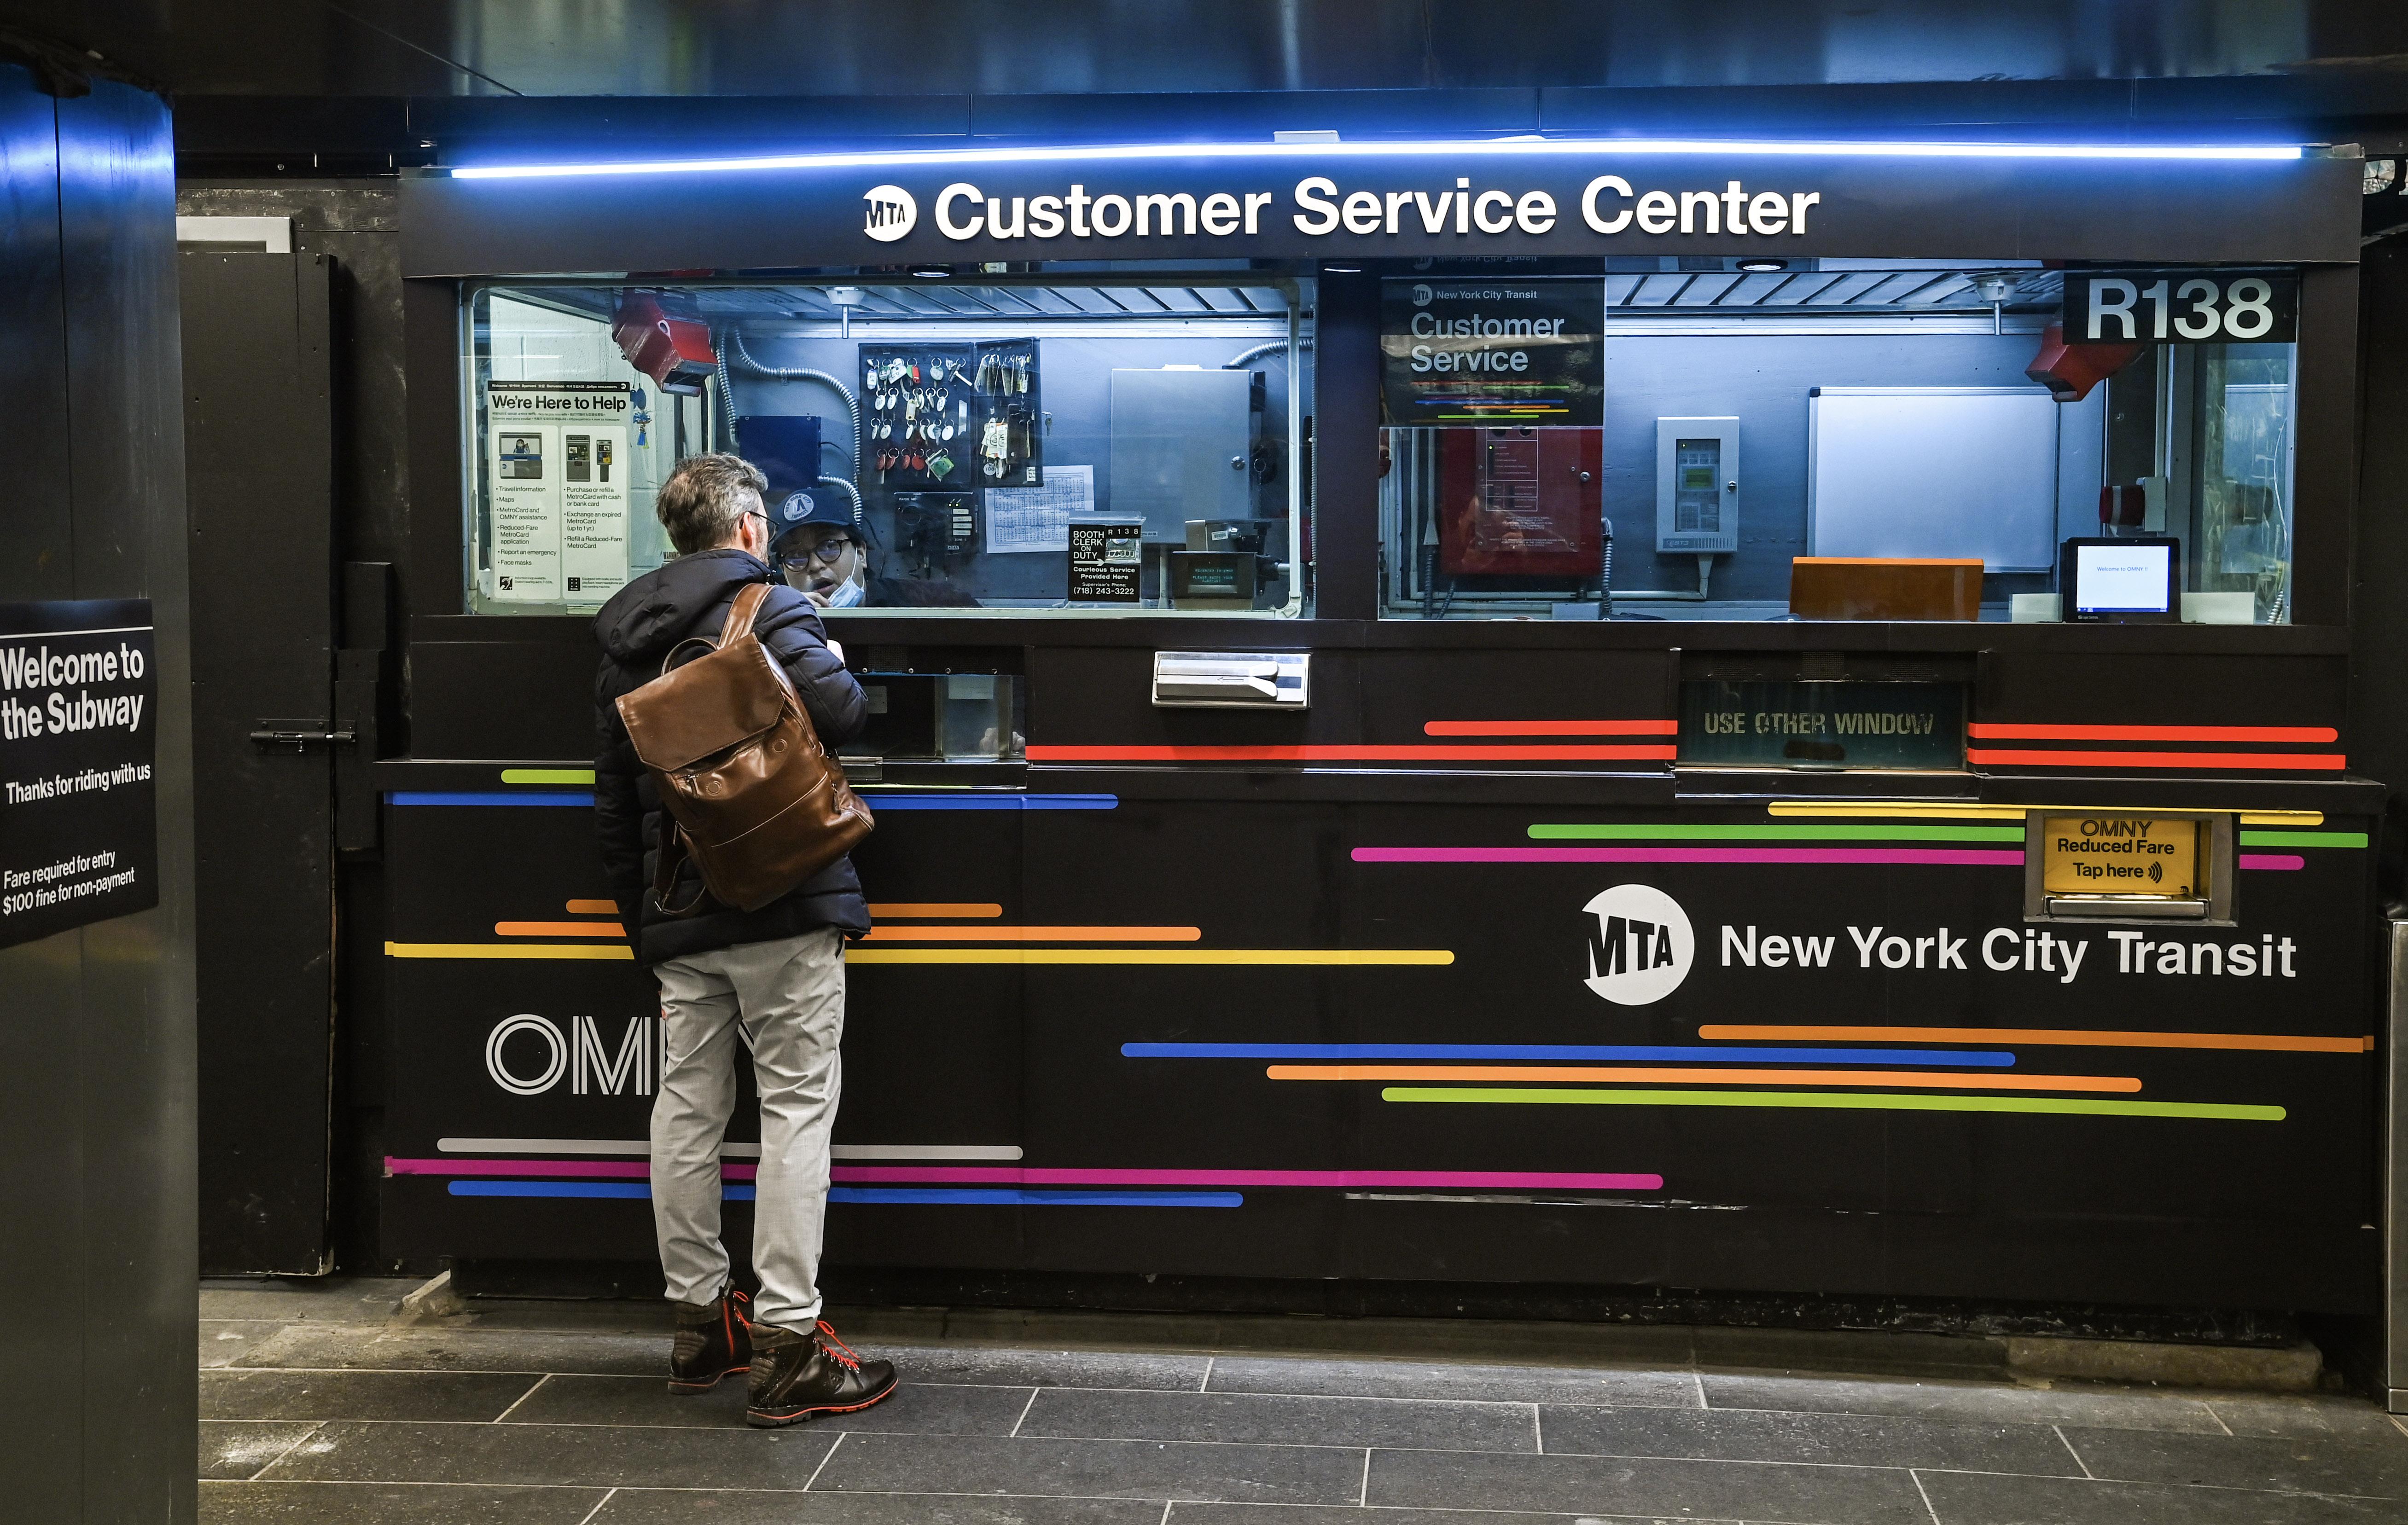 Metropolitan Transportation Authority (MTA) New York City Transit today opened three new Customer Service Centers in the subway system, bringing the total number of stations with Customer Service Centers to six. 